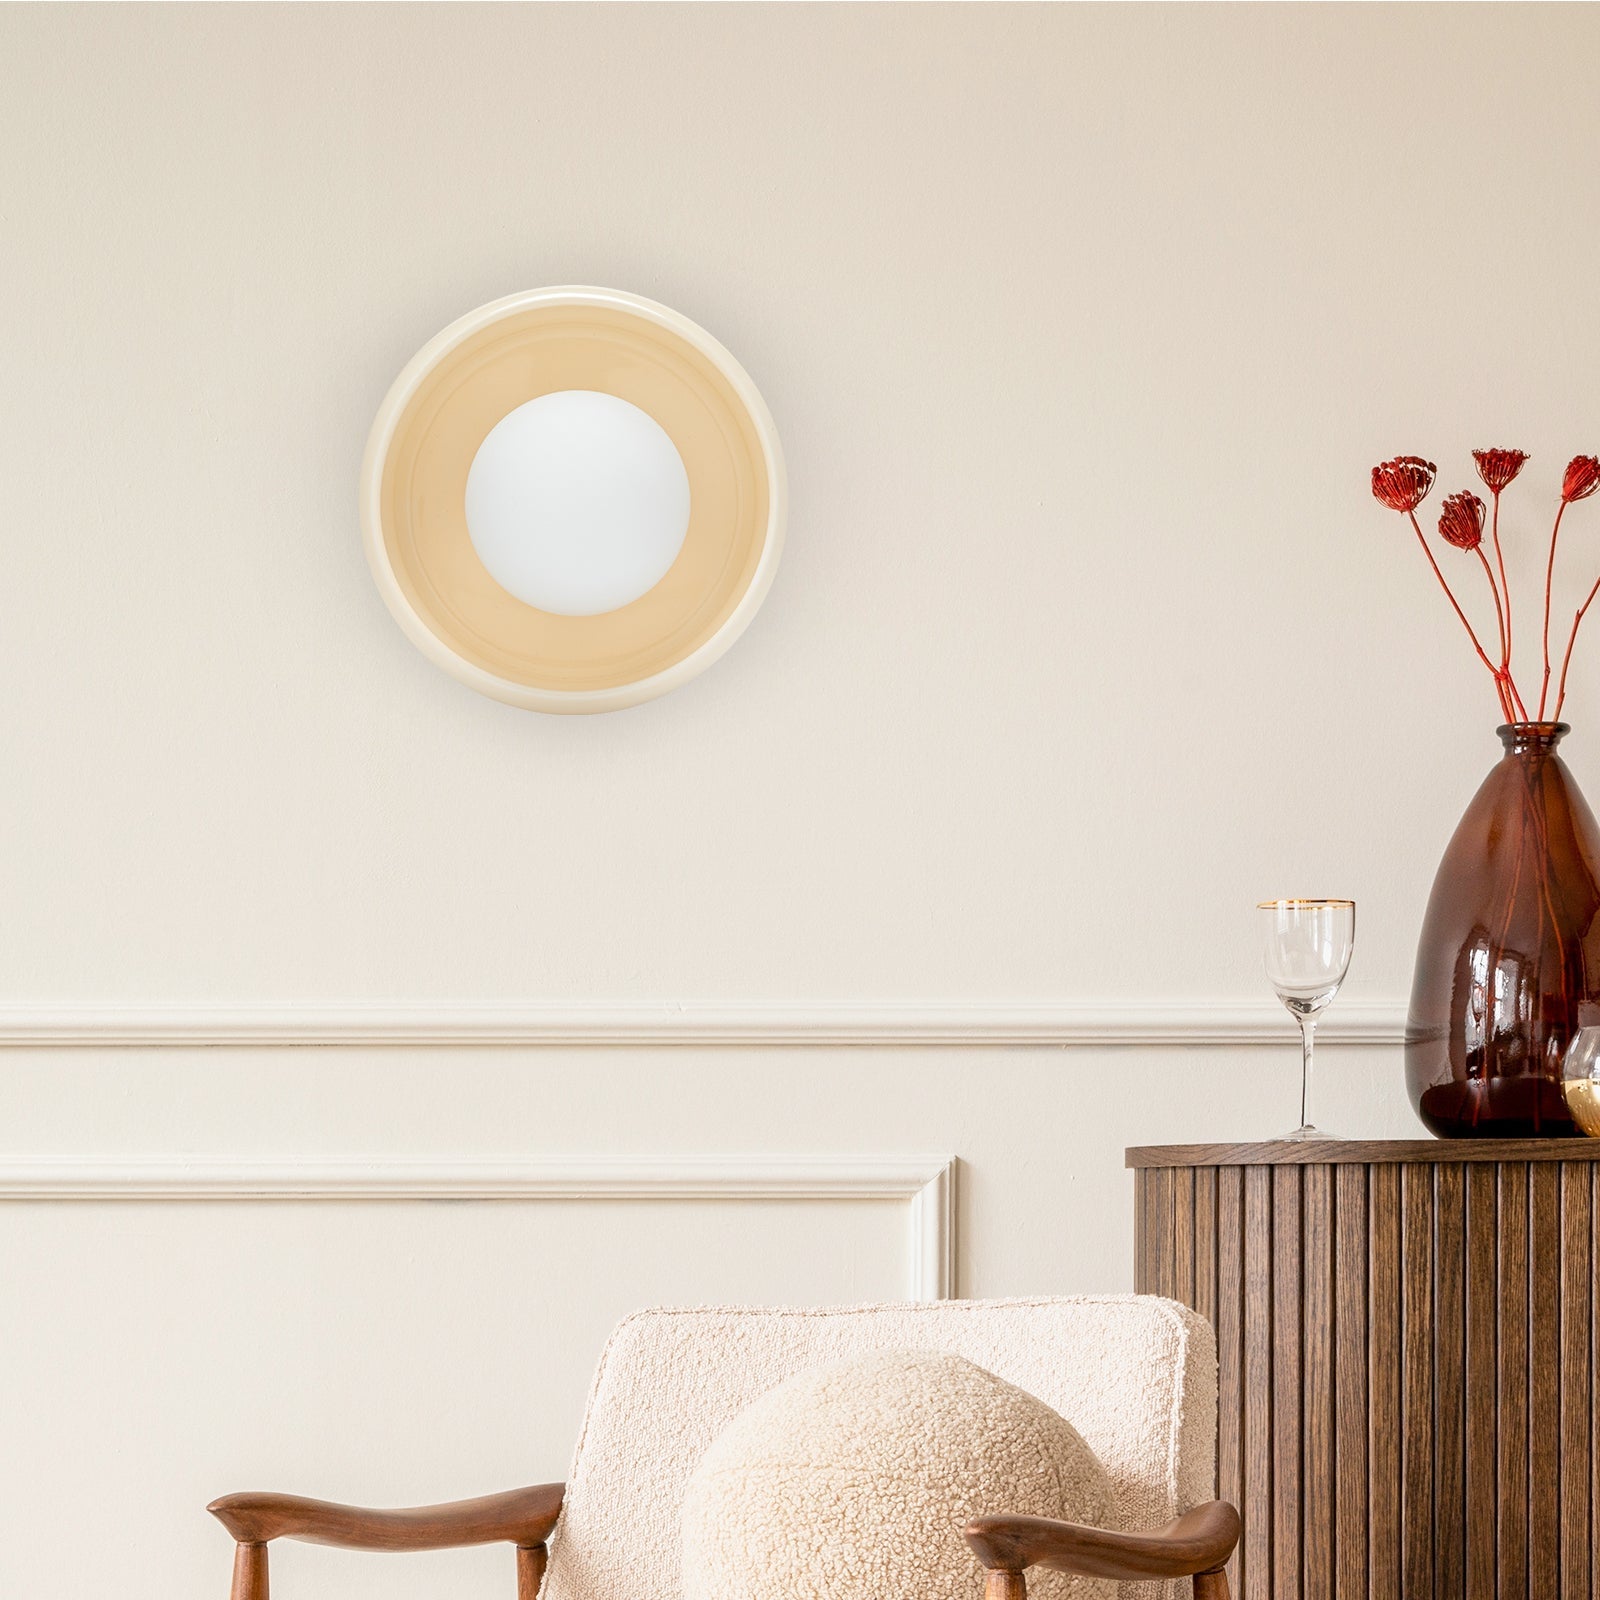 Contemporary Stained Simple Ceramic Wall Light